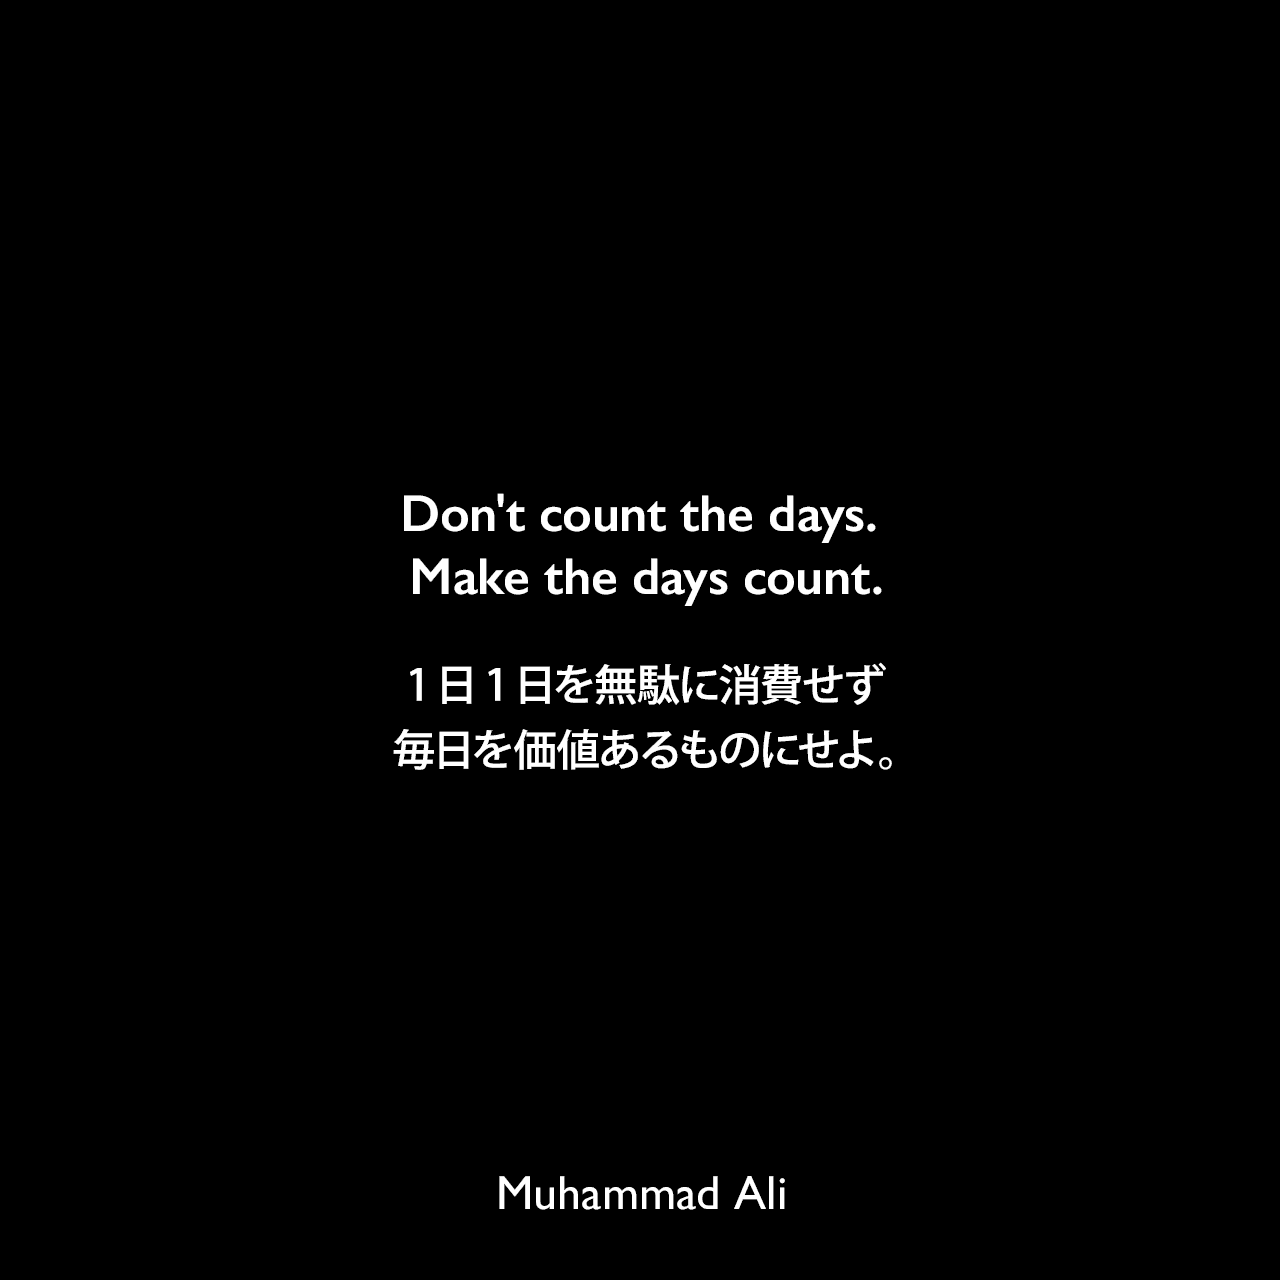 Don't count the days. Make the days count.1日1日を無駄に消費せず、毎日を価値あるものにせよ。Muhammad Ali